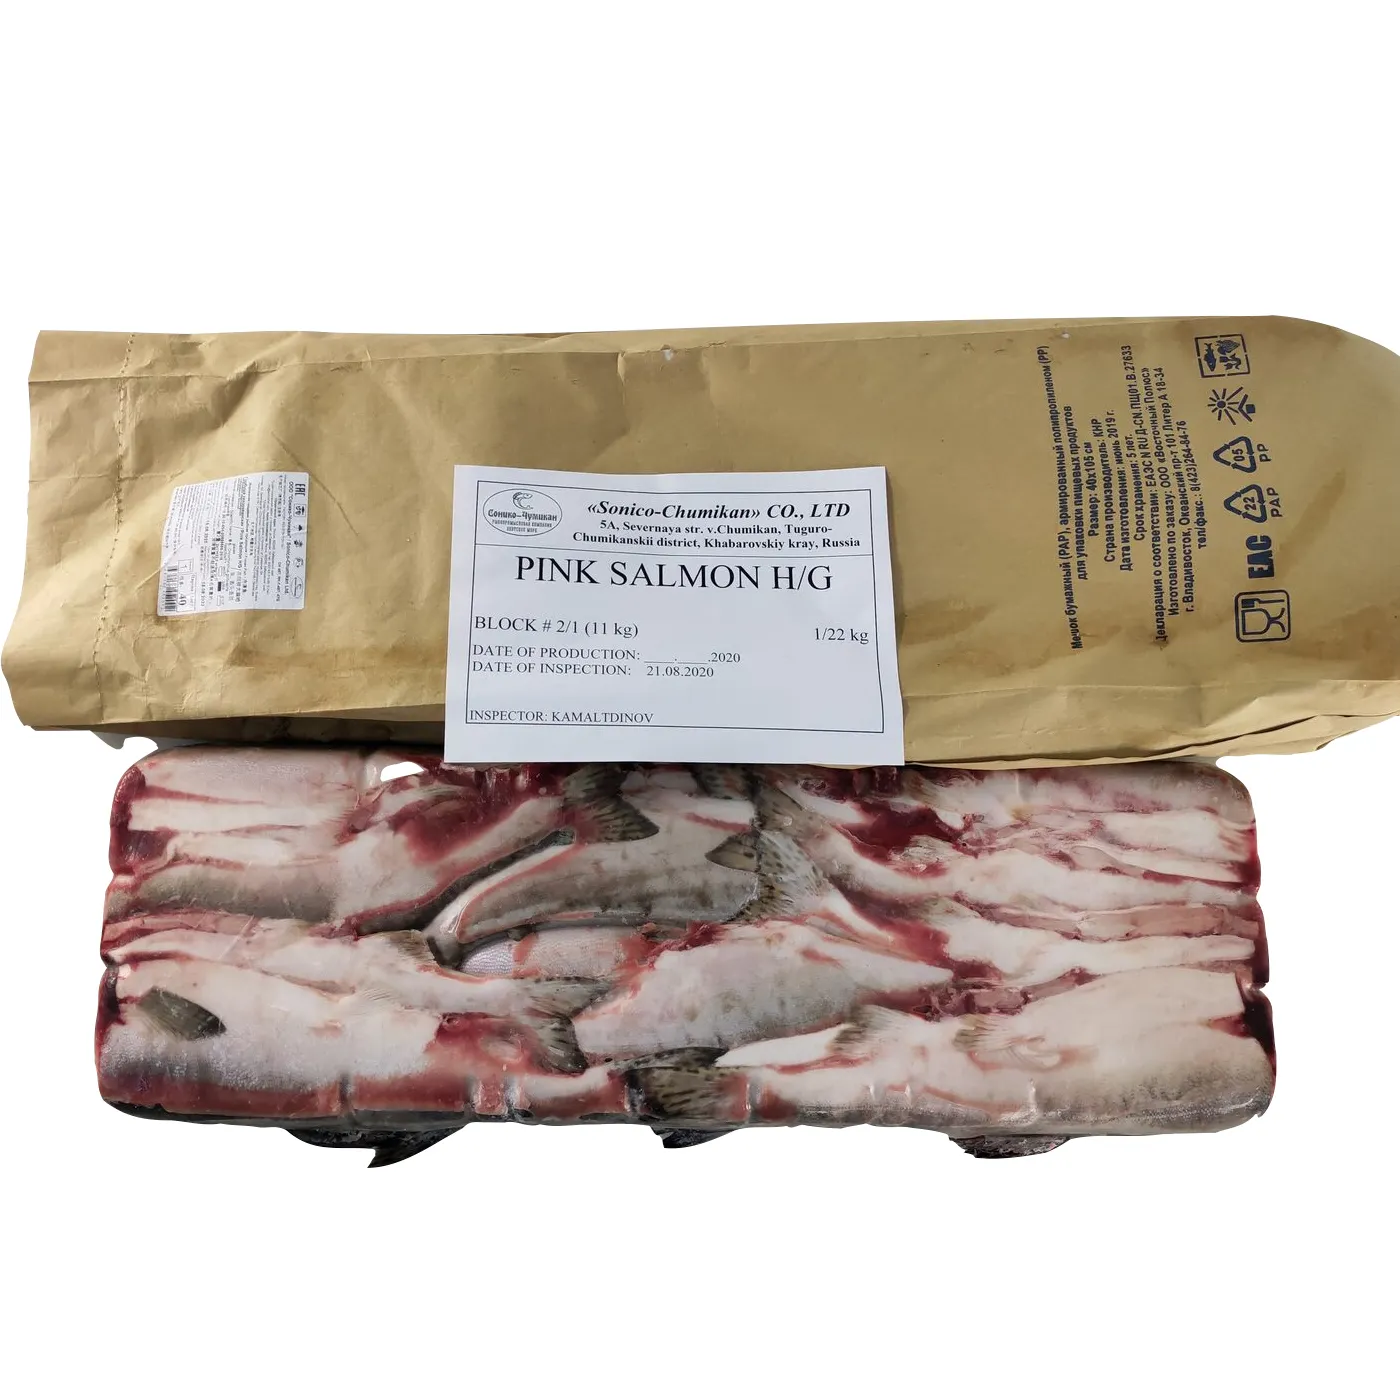 Frozen Pink Fish Food Products Seafood 1/22 kg Block Bag Packaging Oncorhynchus Gorbuscha Salmon Without Head